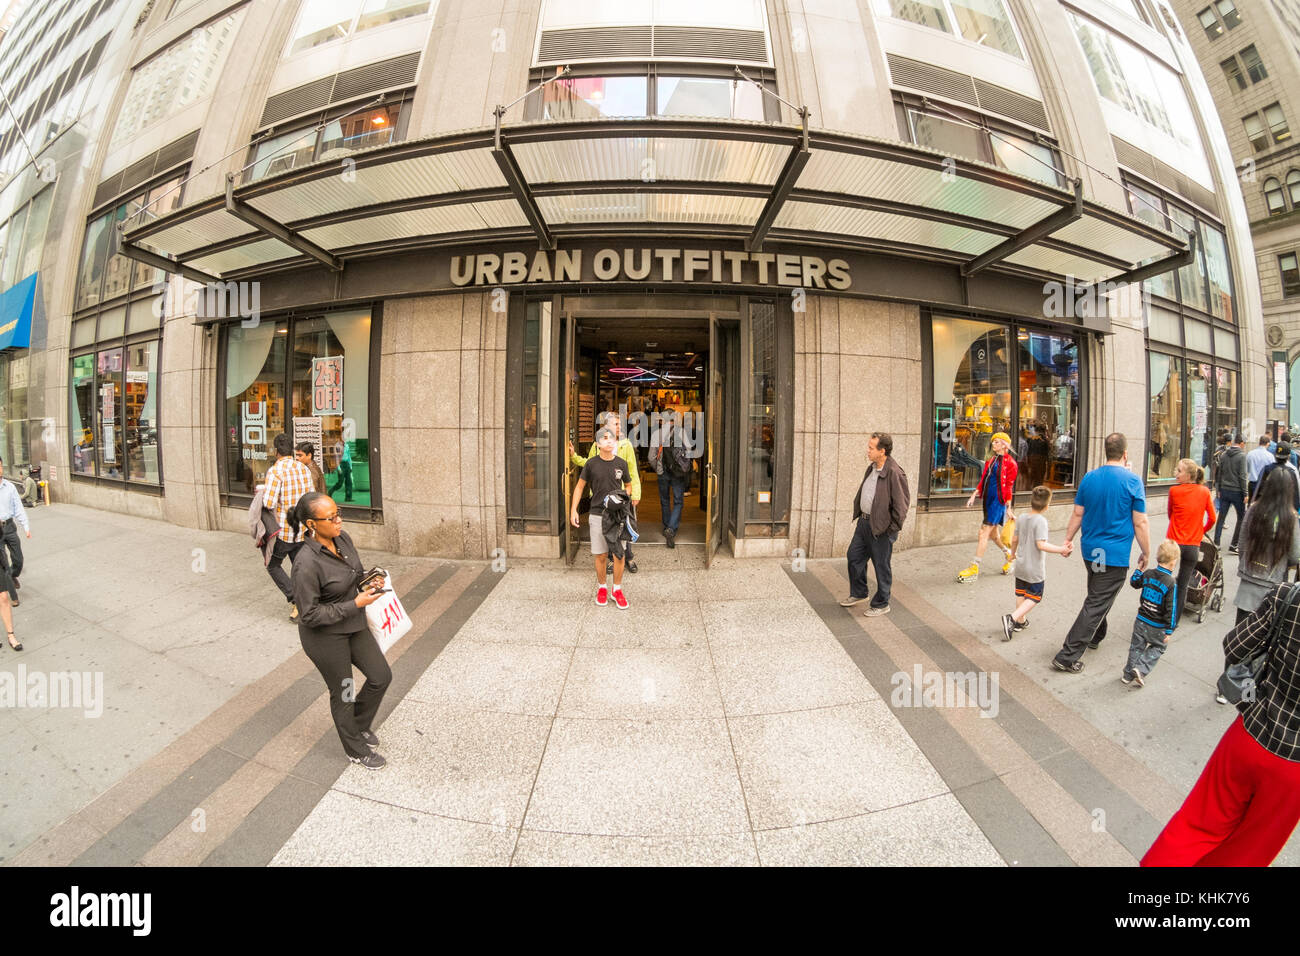 Urban Outfitters, 5th Avenue, Manhattan, New York City, NY, United ...